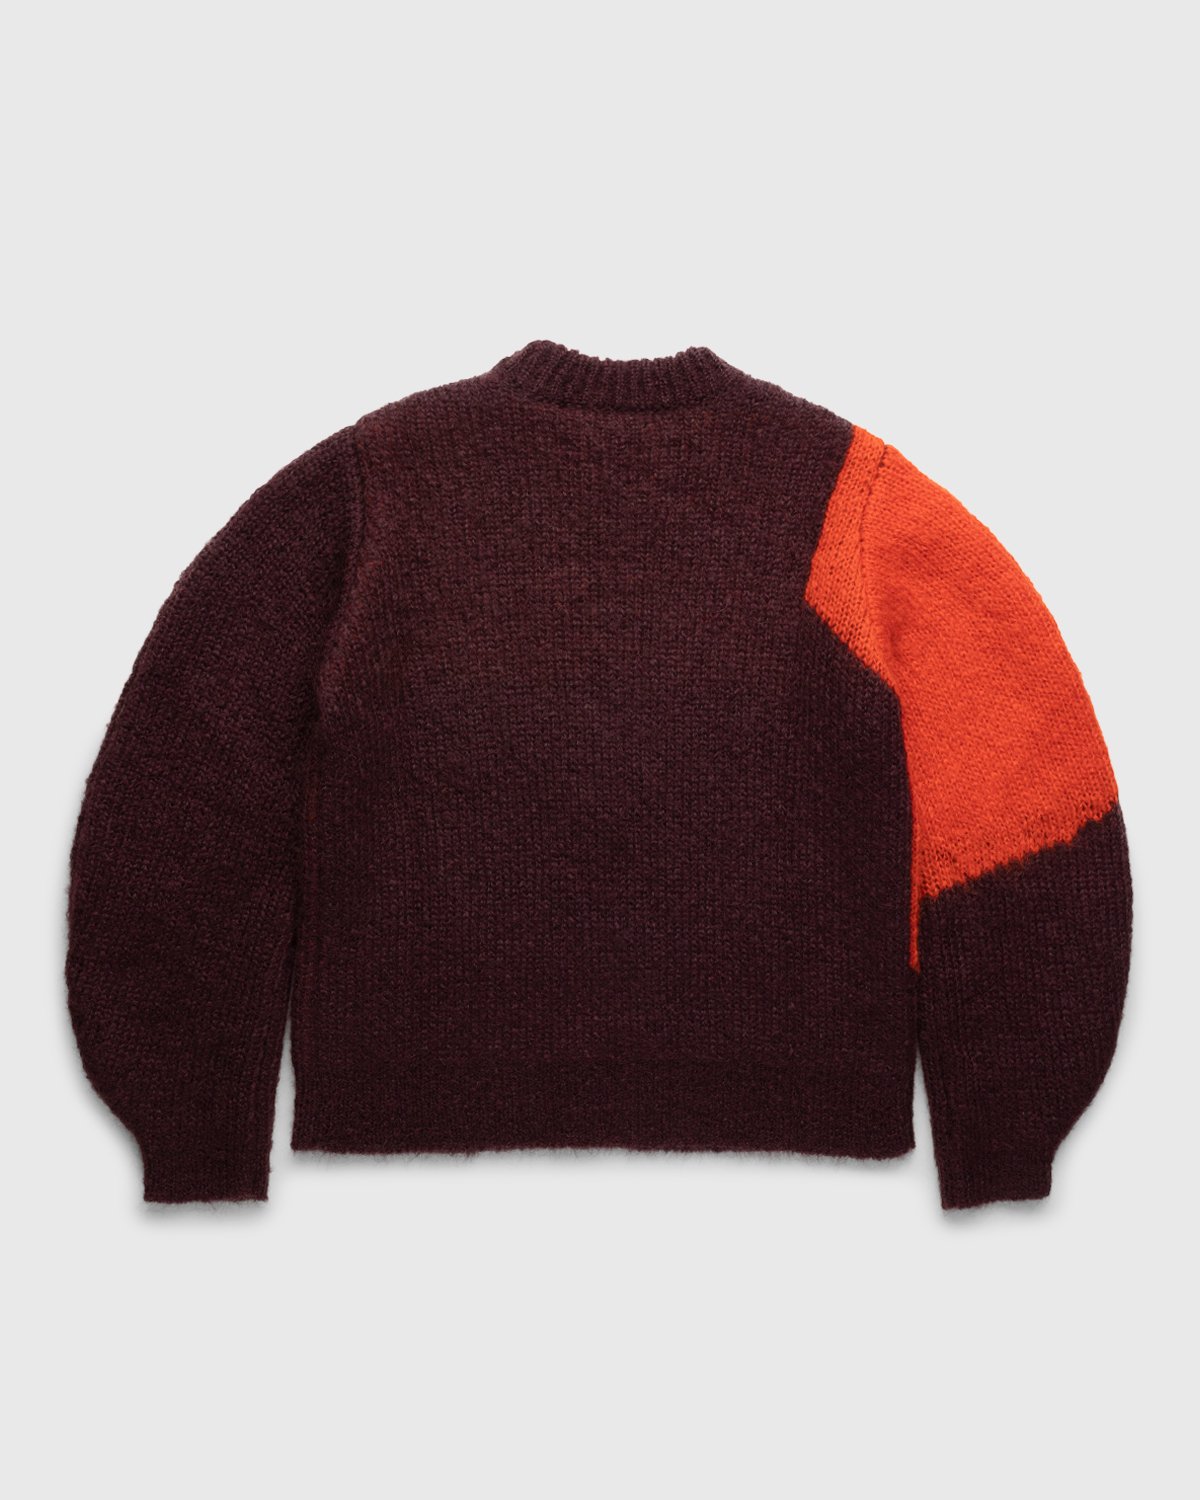 Jil Sander - Sweater Knitted Open Red - Clothing - Red - Image 2